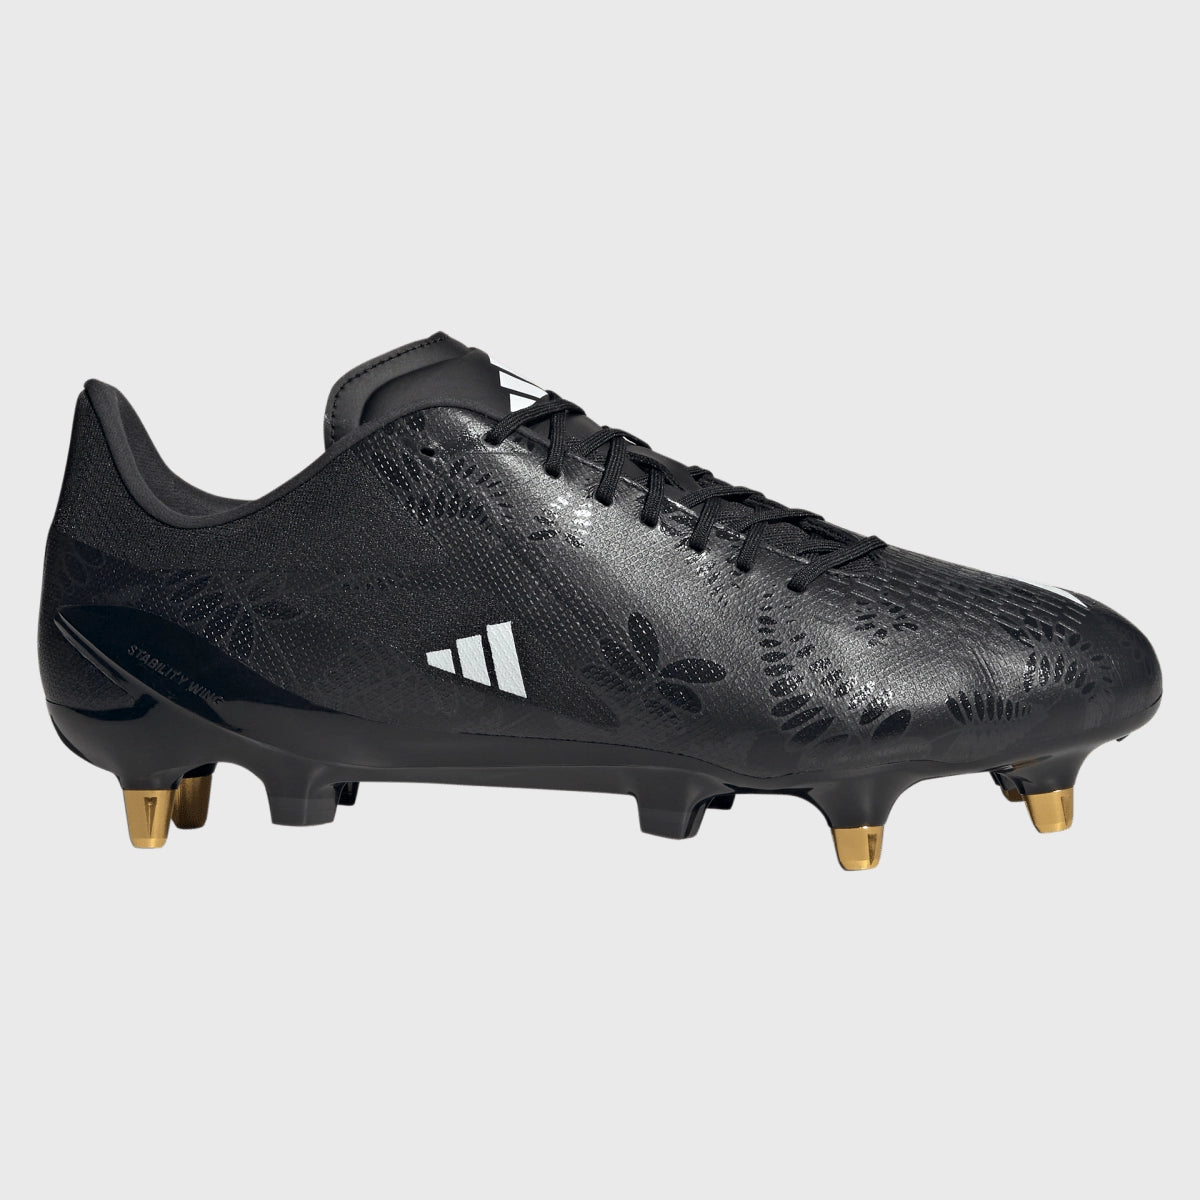 Adidas Rugby Boots - Kakari Elite and Z.1